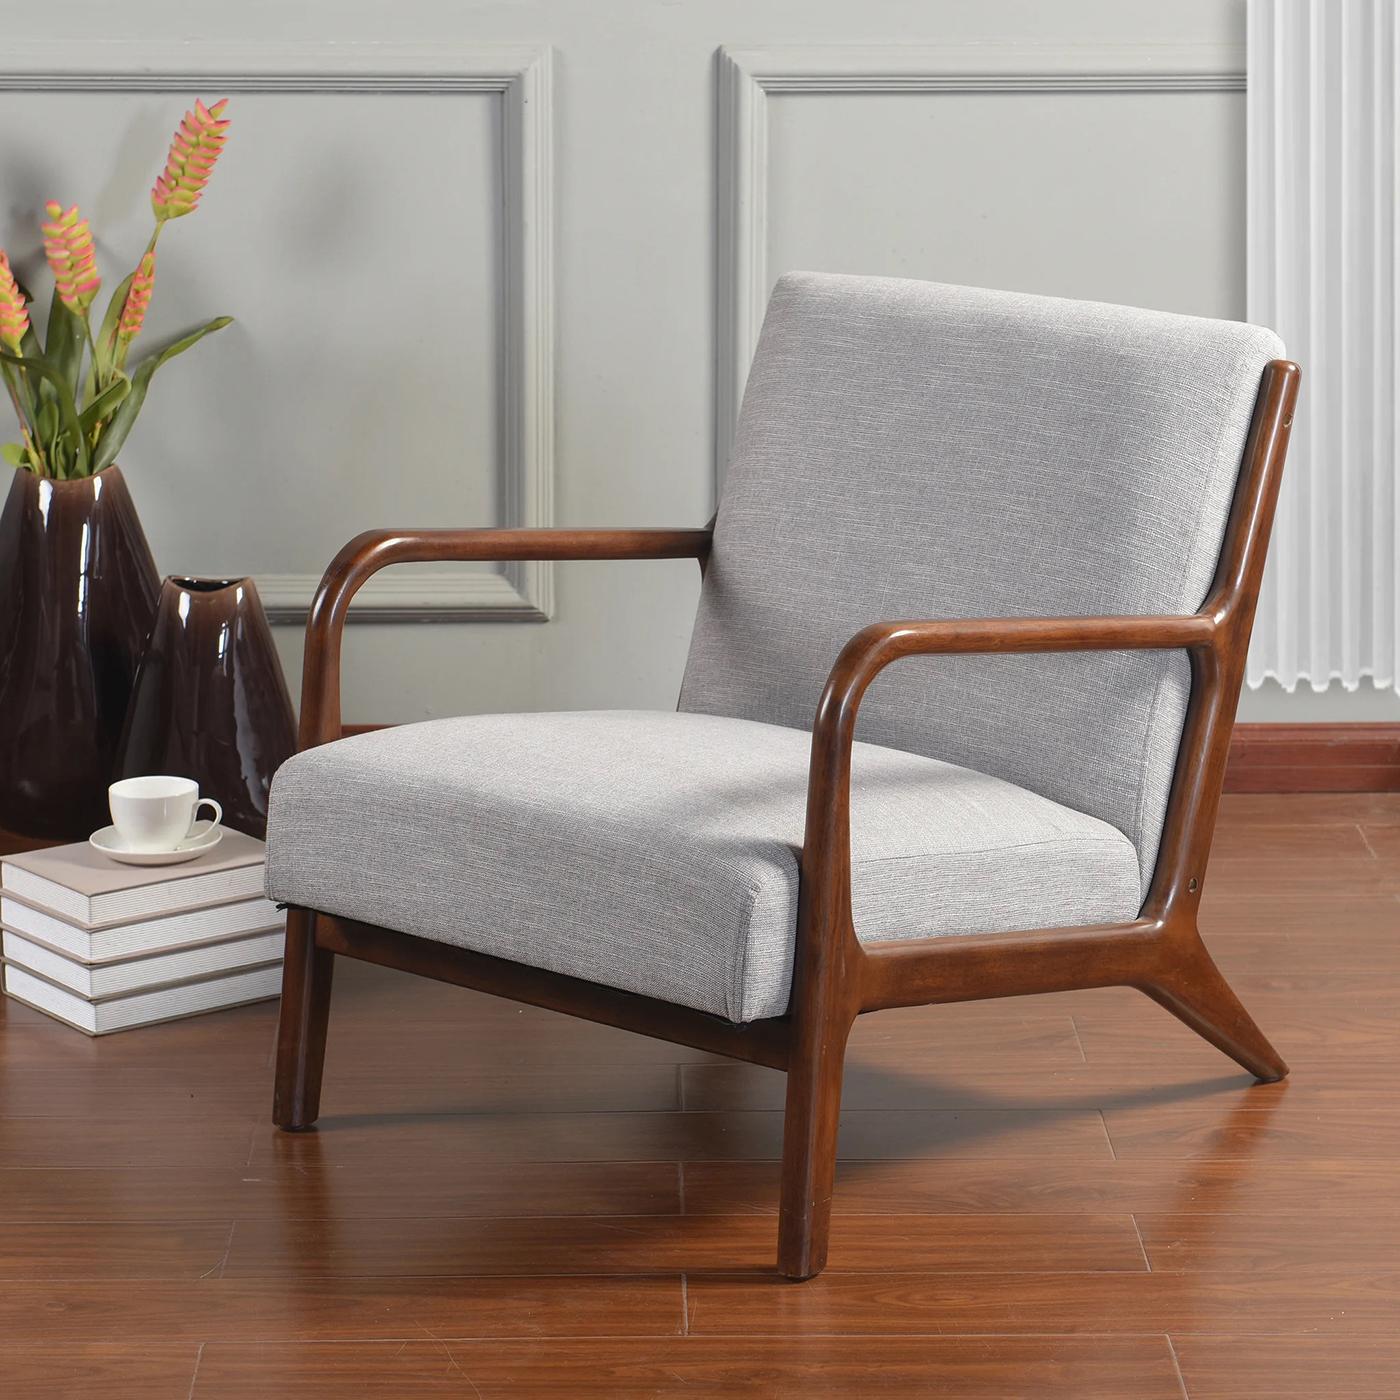 Mid century style Low Lounge Armchairs, the sleek modern frames with an upholstered boxed cushion back and seat. 

Dimensions: 34